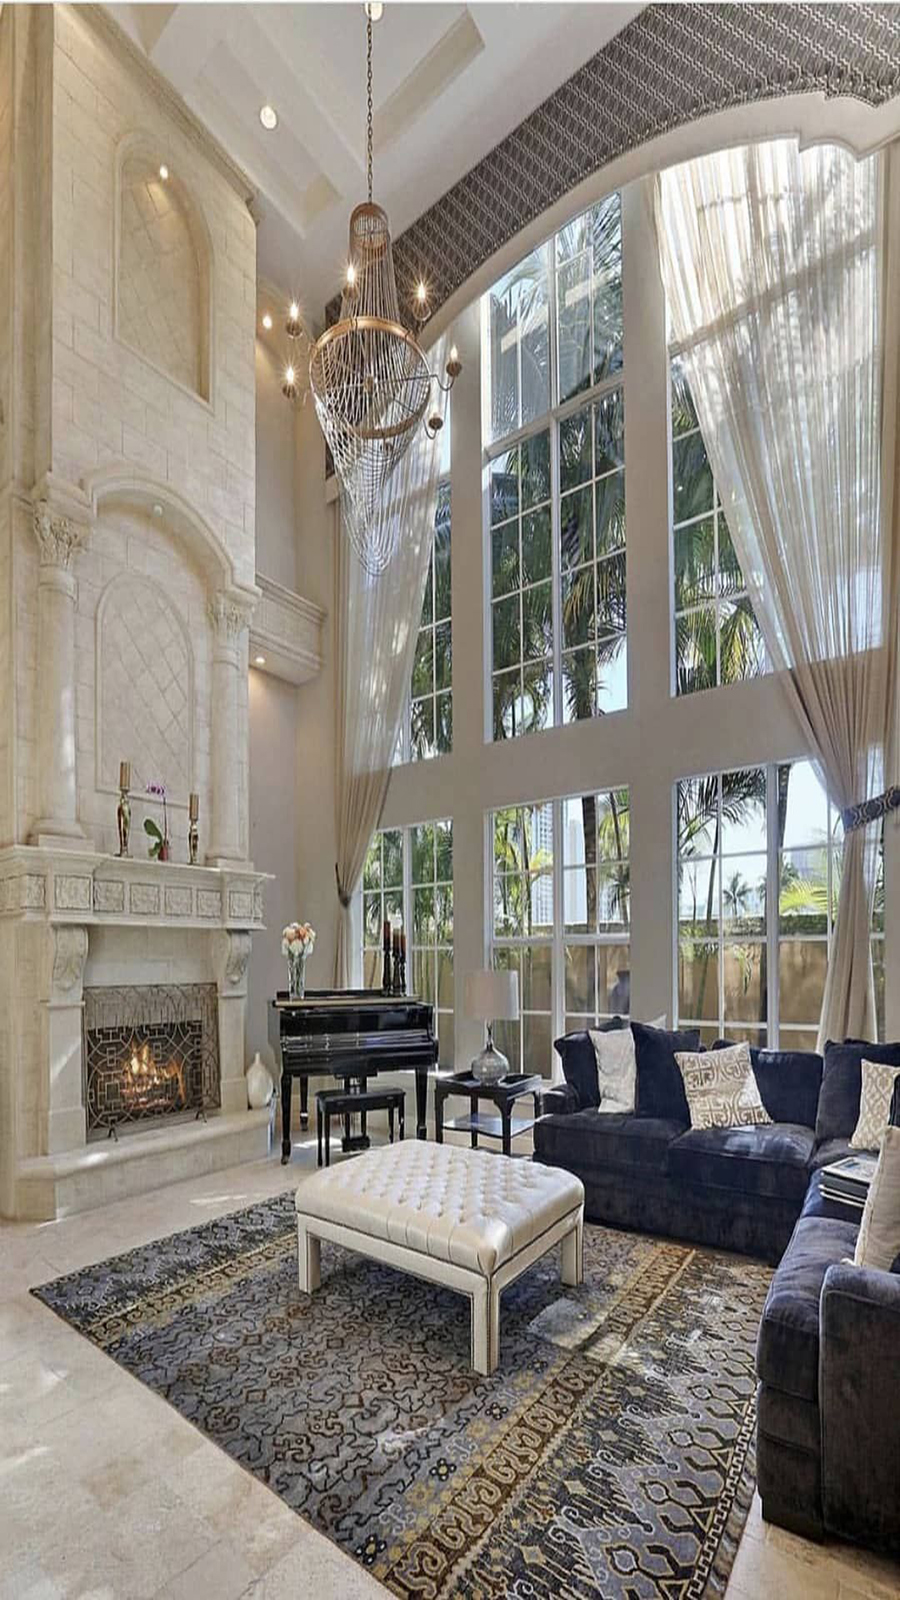 Beautiful great room_ The tall ceilings_windows create such drama